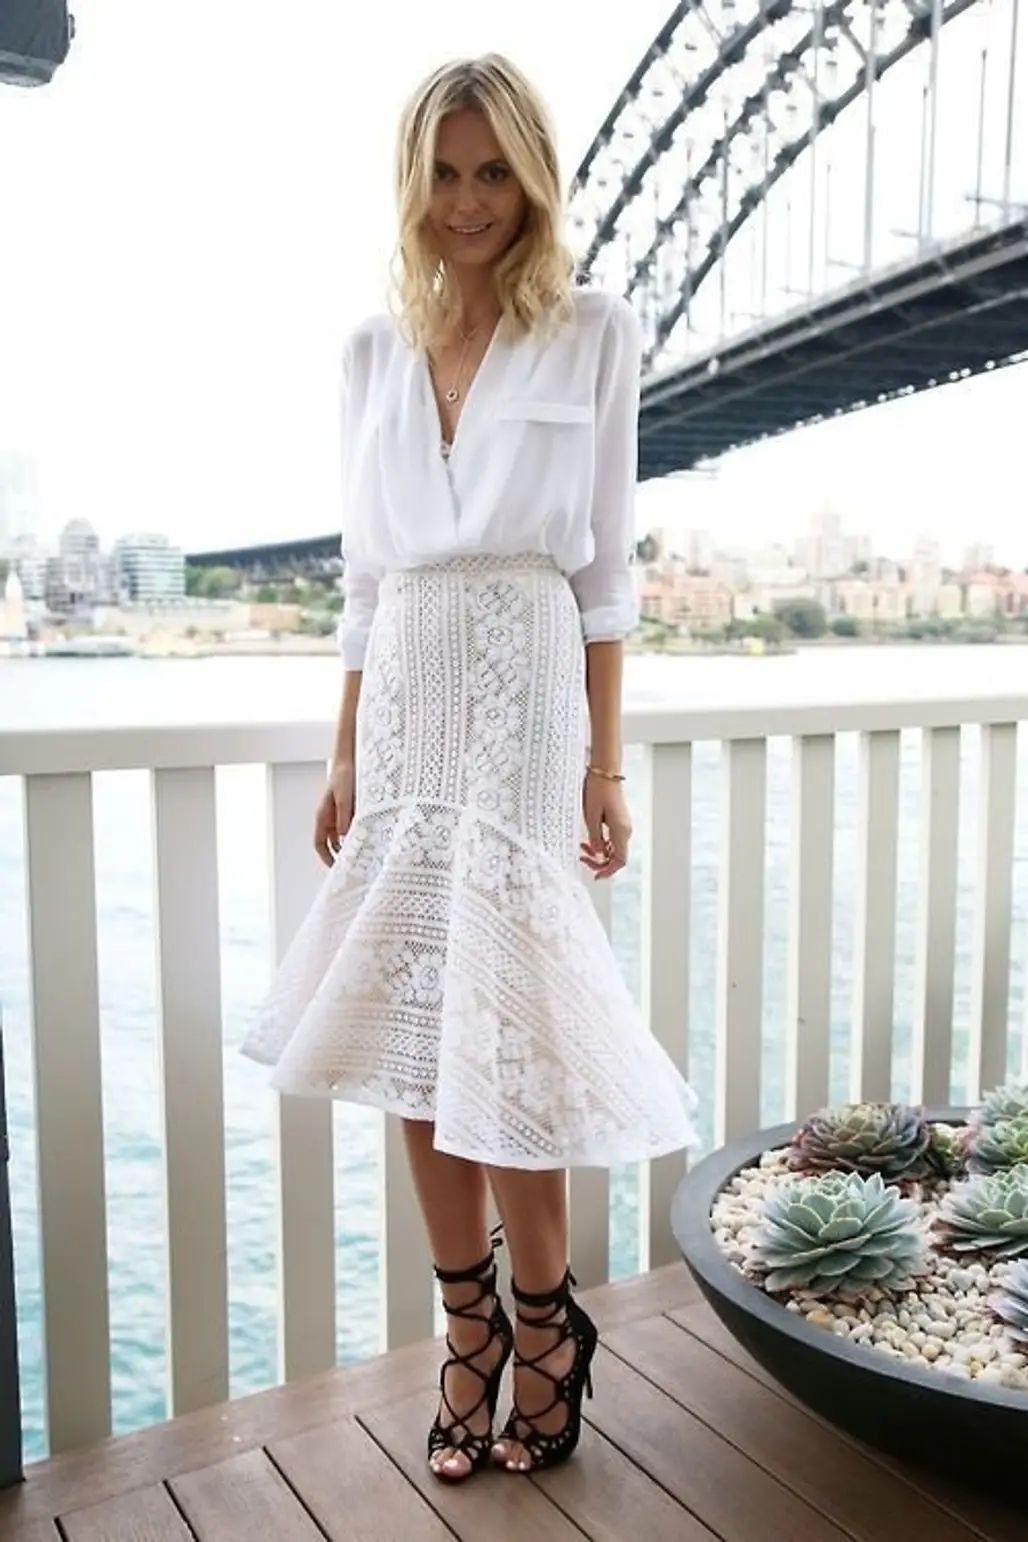 With a Beautiful Lace White Skirt